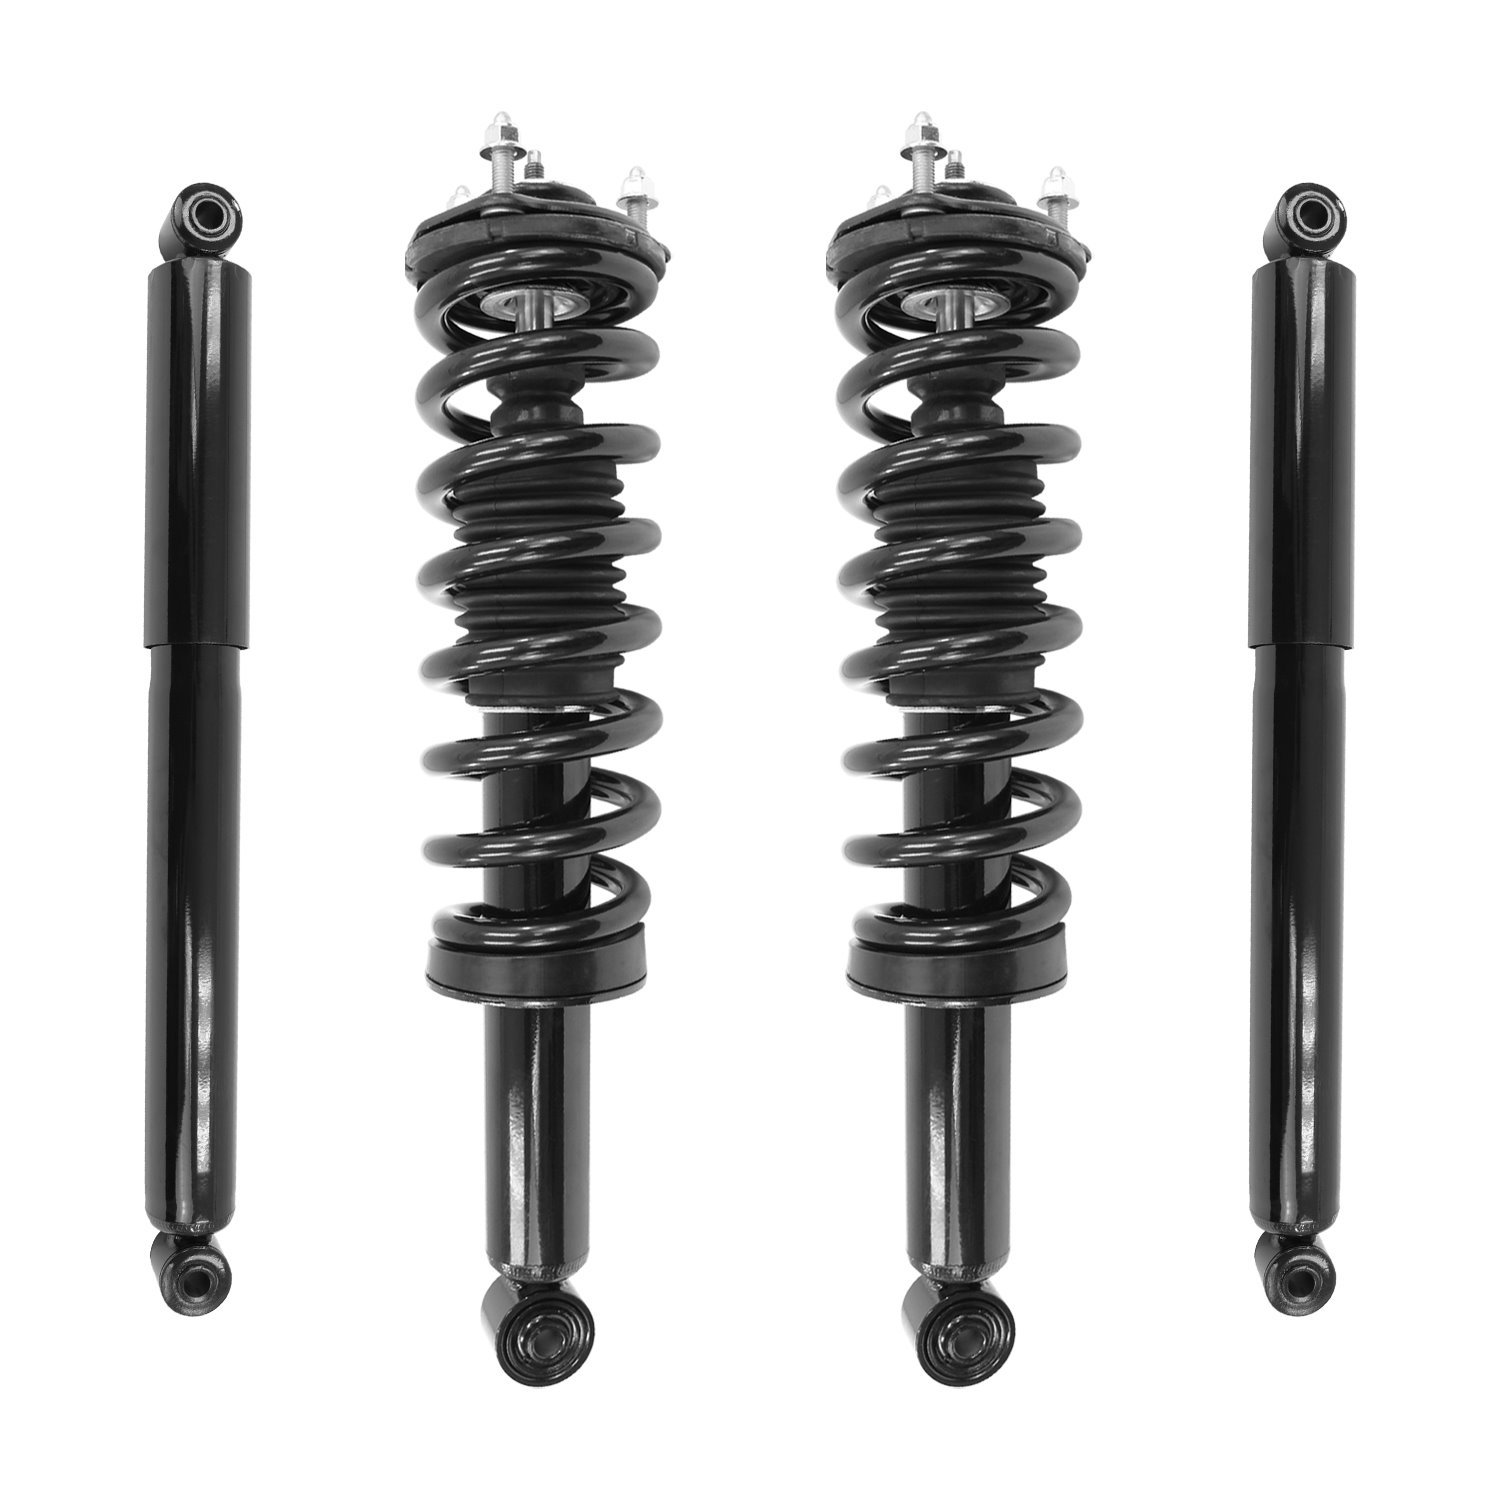 4-13560-251370-001 Front & Rear Complete Strut Assembly Shock Absorber Kit Fits Select Chevy Colorado, GMC Canyon